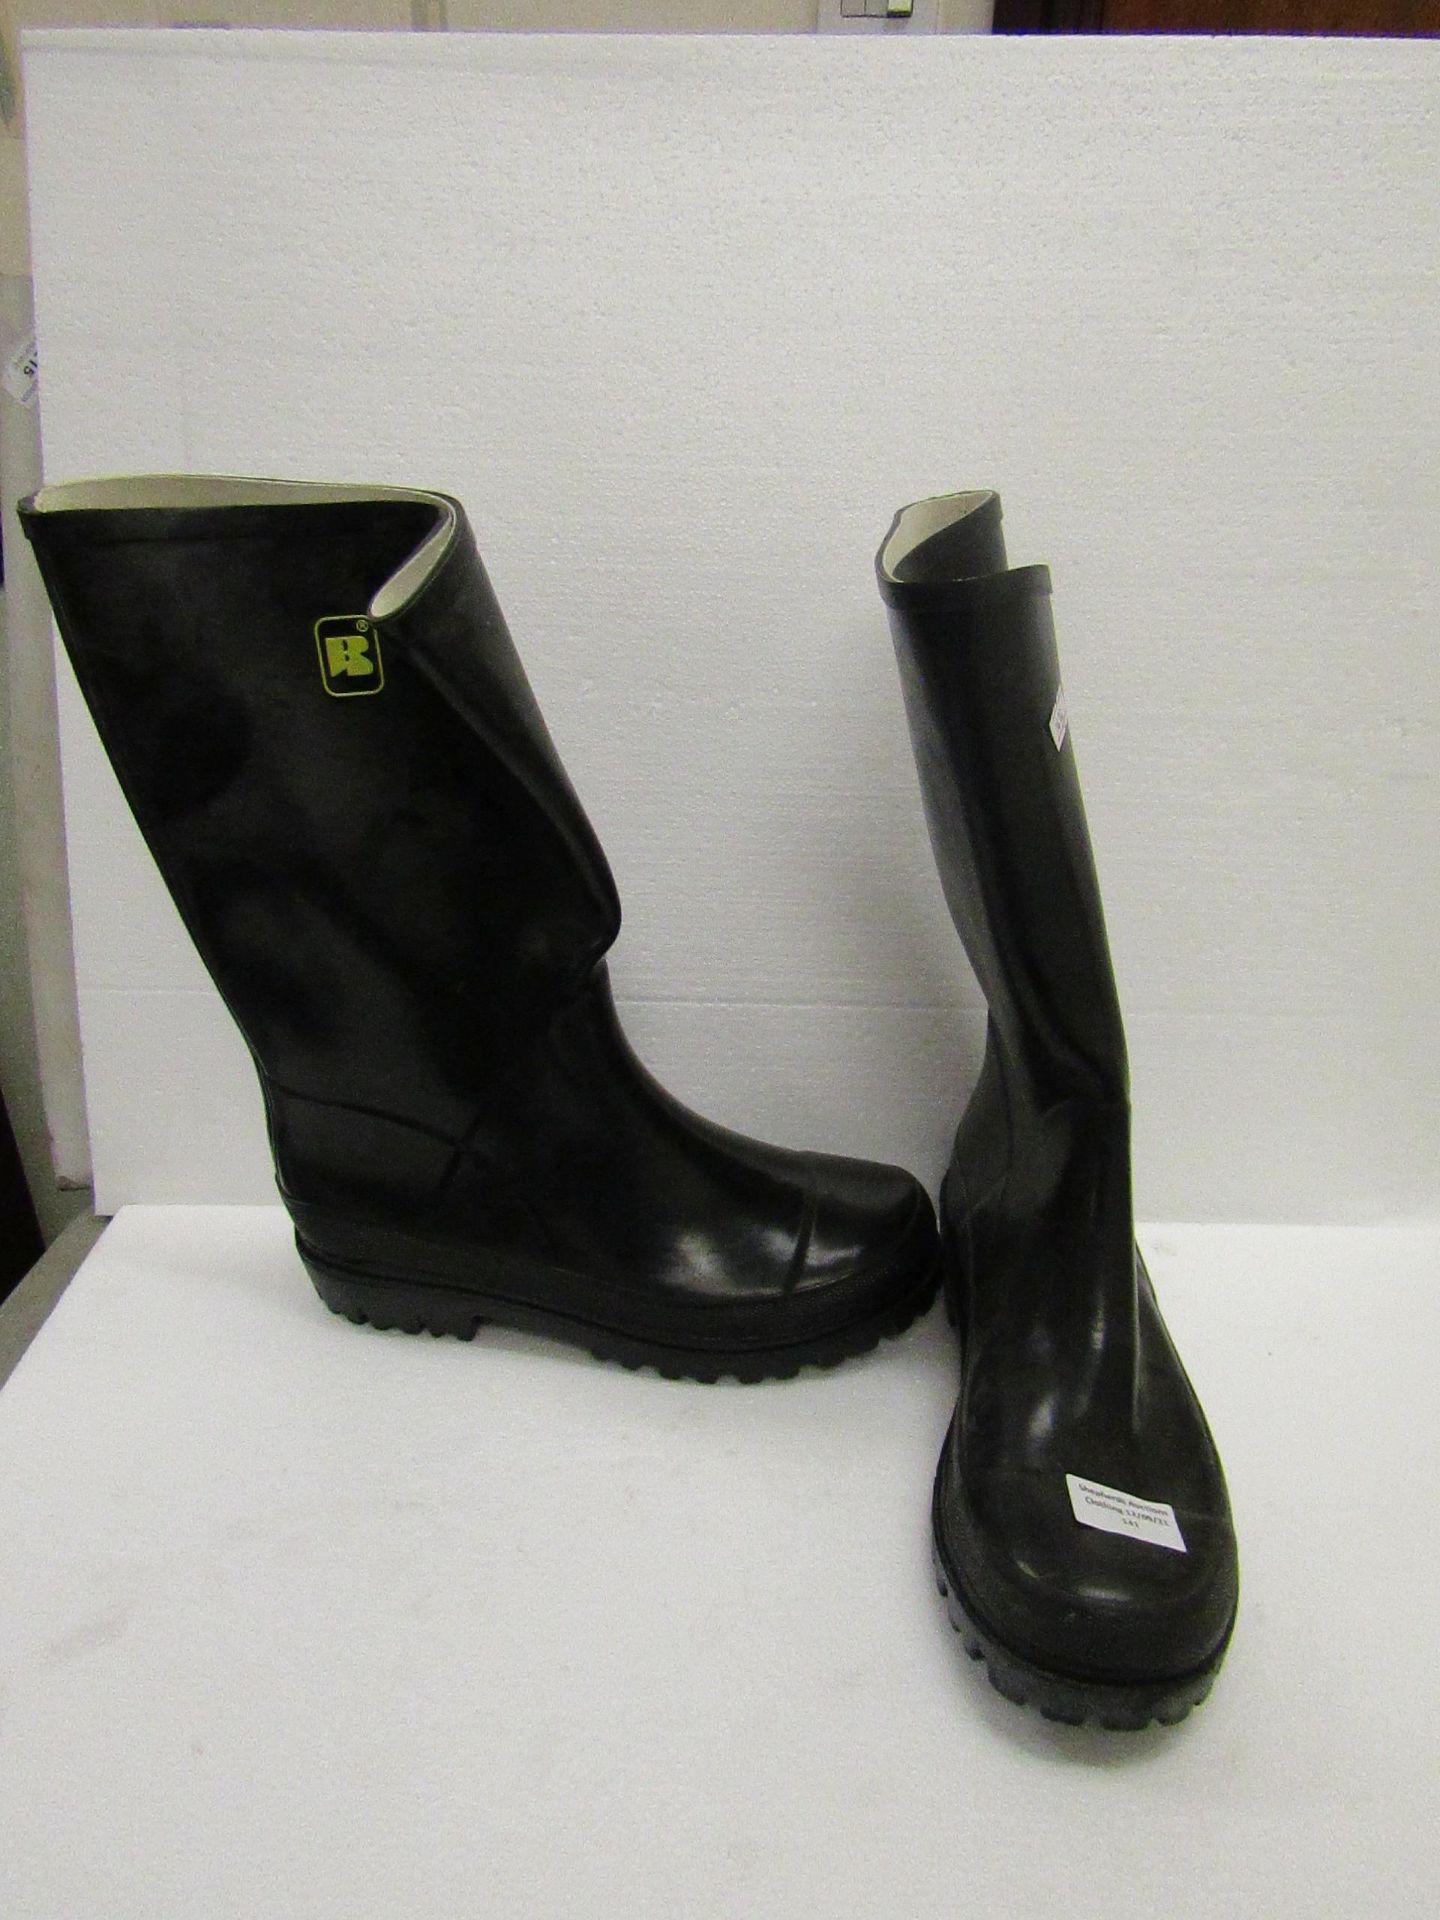 Black Rubber Boots size 8 new see image